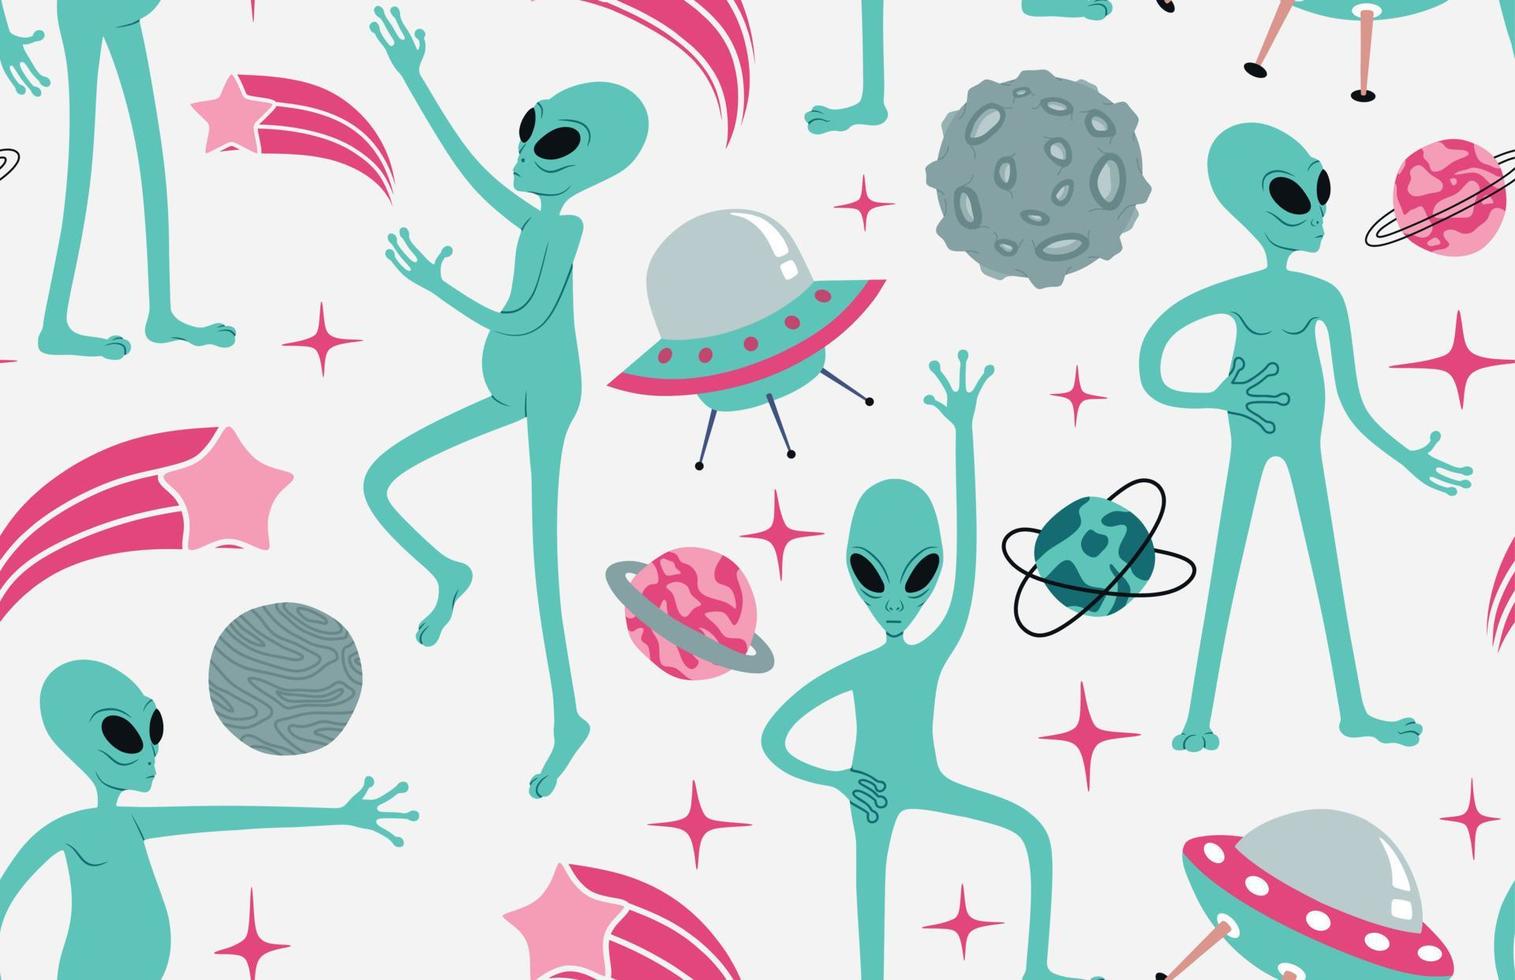 Cute space pattern with aliens. vector